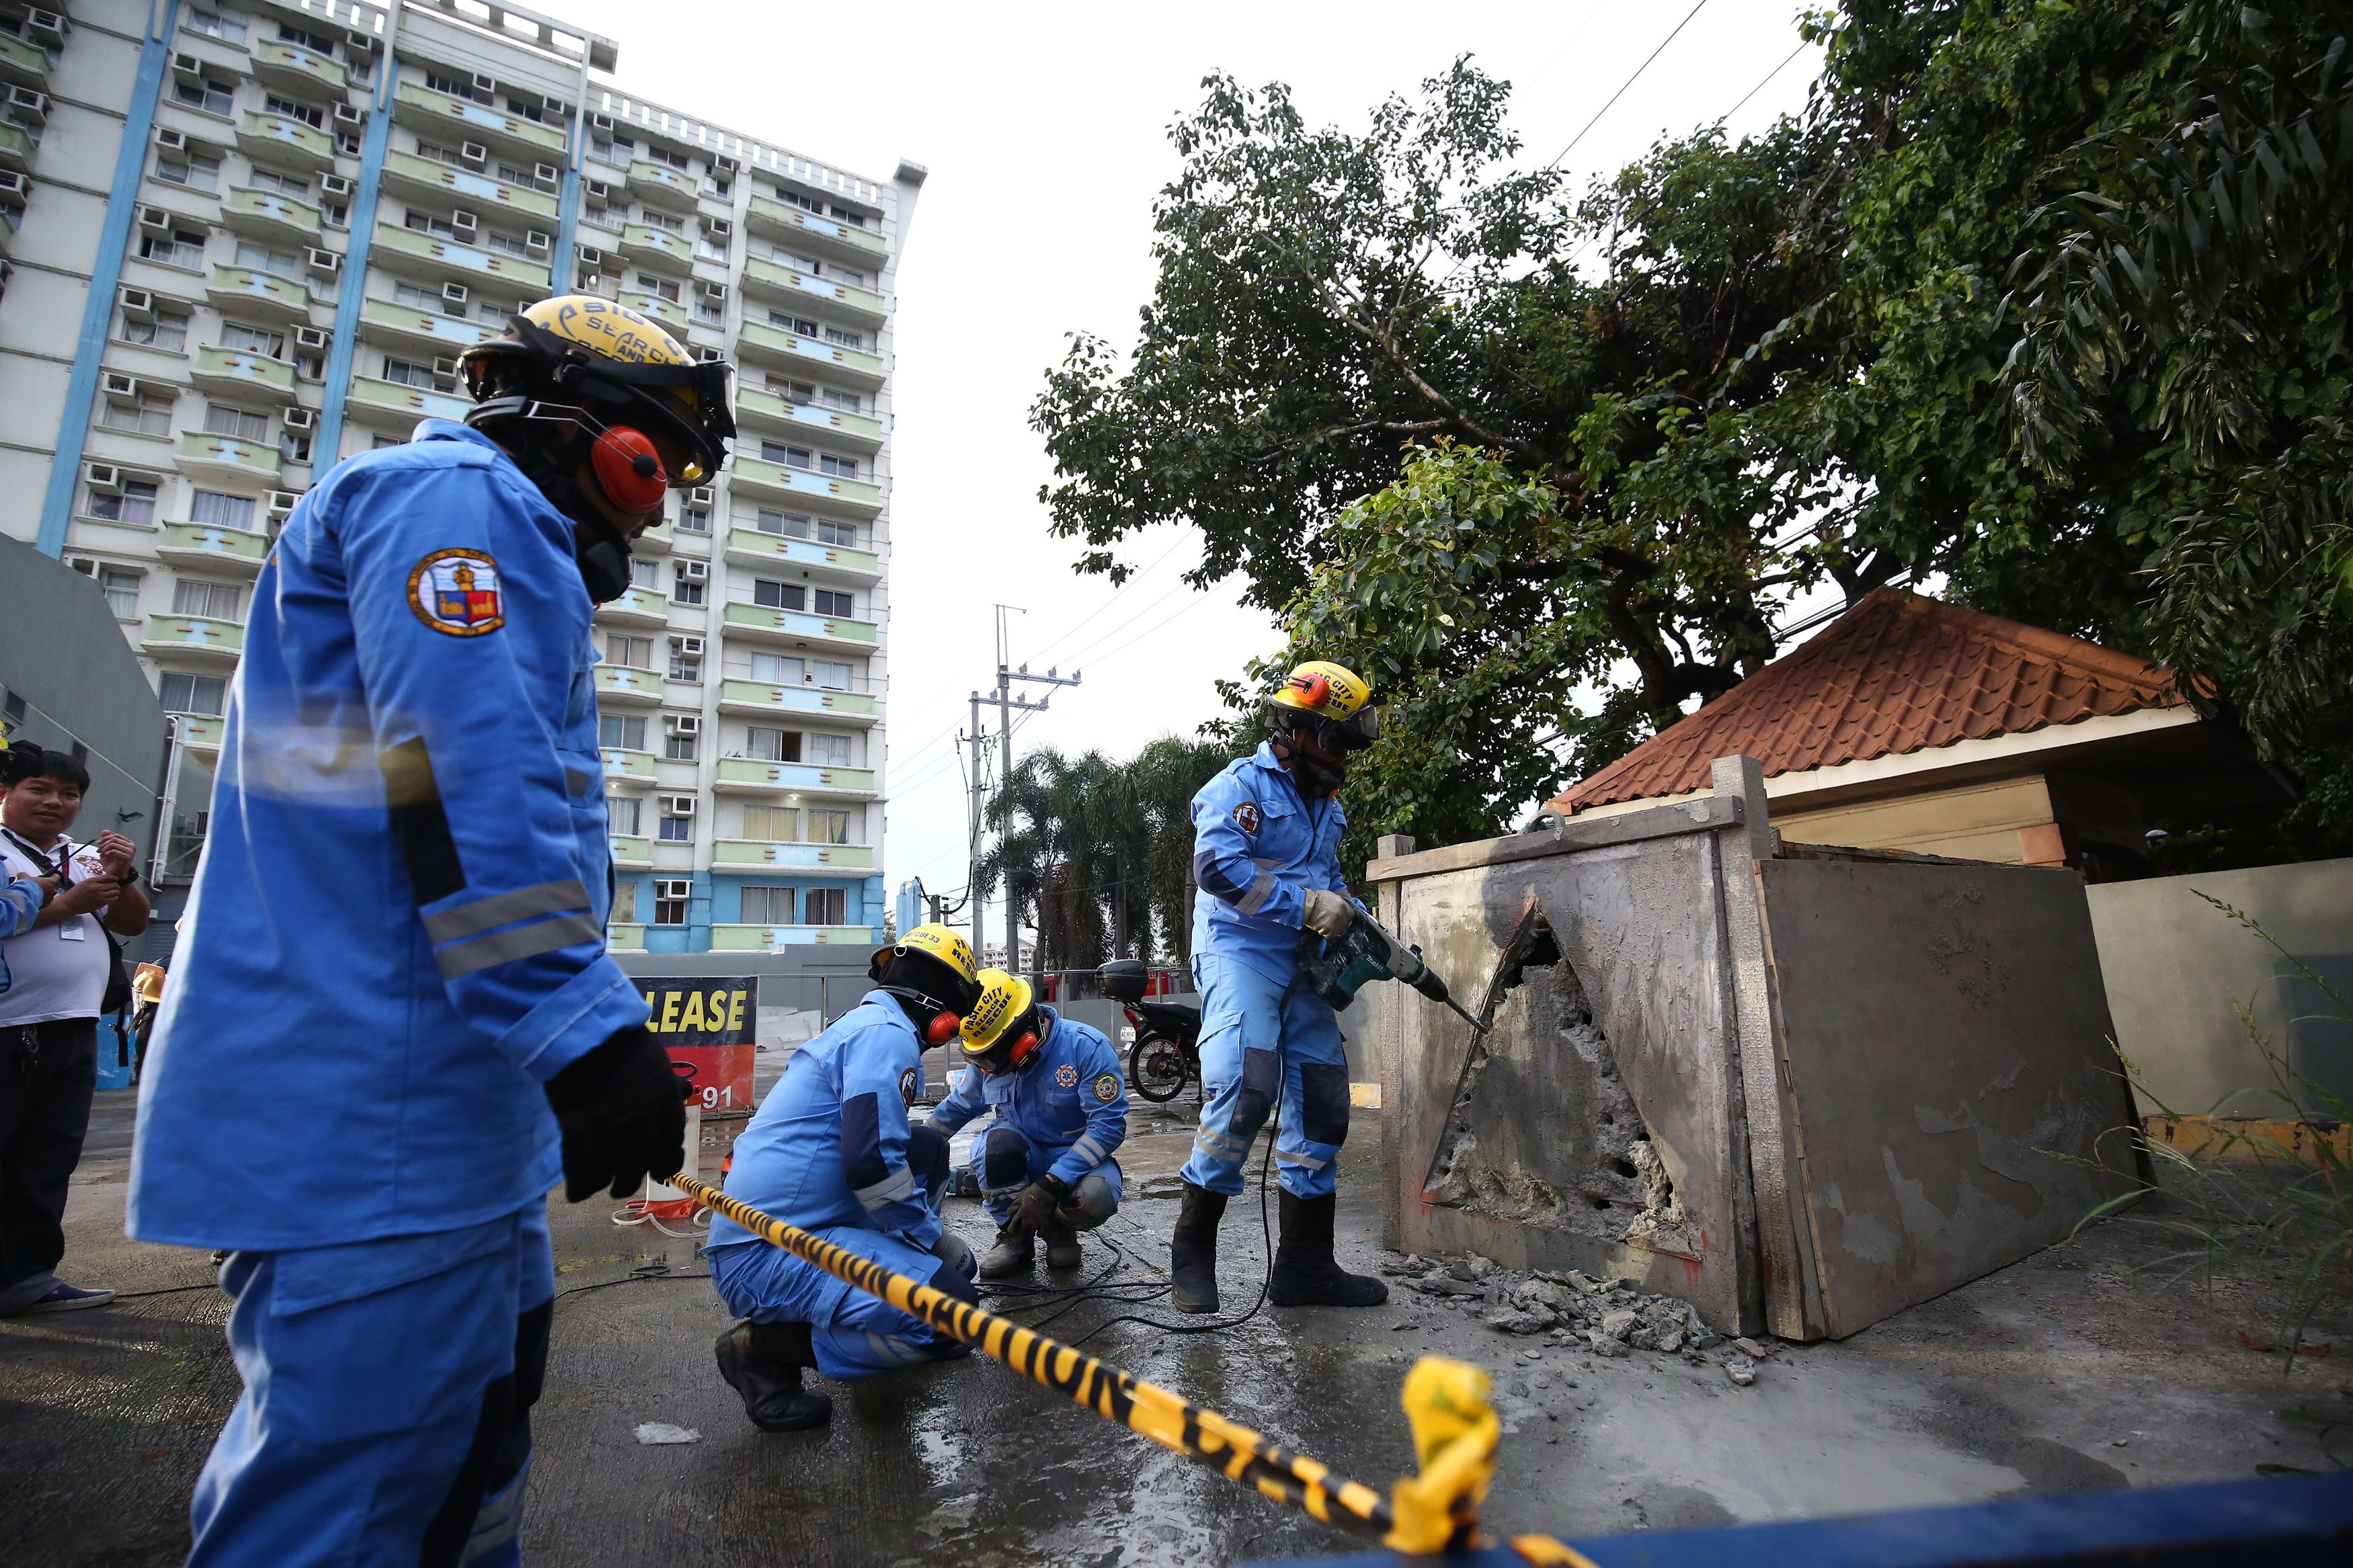 Rescue personnel respond and apply first aid to mock victims at the various scenario in case "the Big One" strikes Metro Manila during the 5th Metro Manila Shake Drill in Pasig City on Saturday, July 27.
Photo by Ben Nabong 